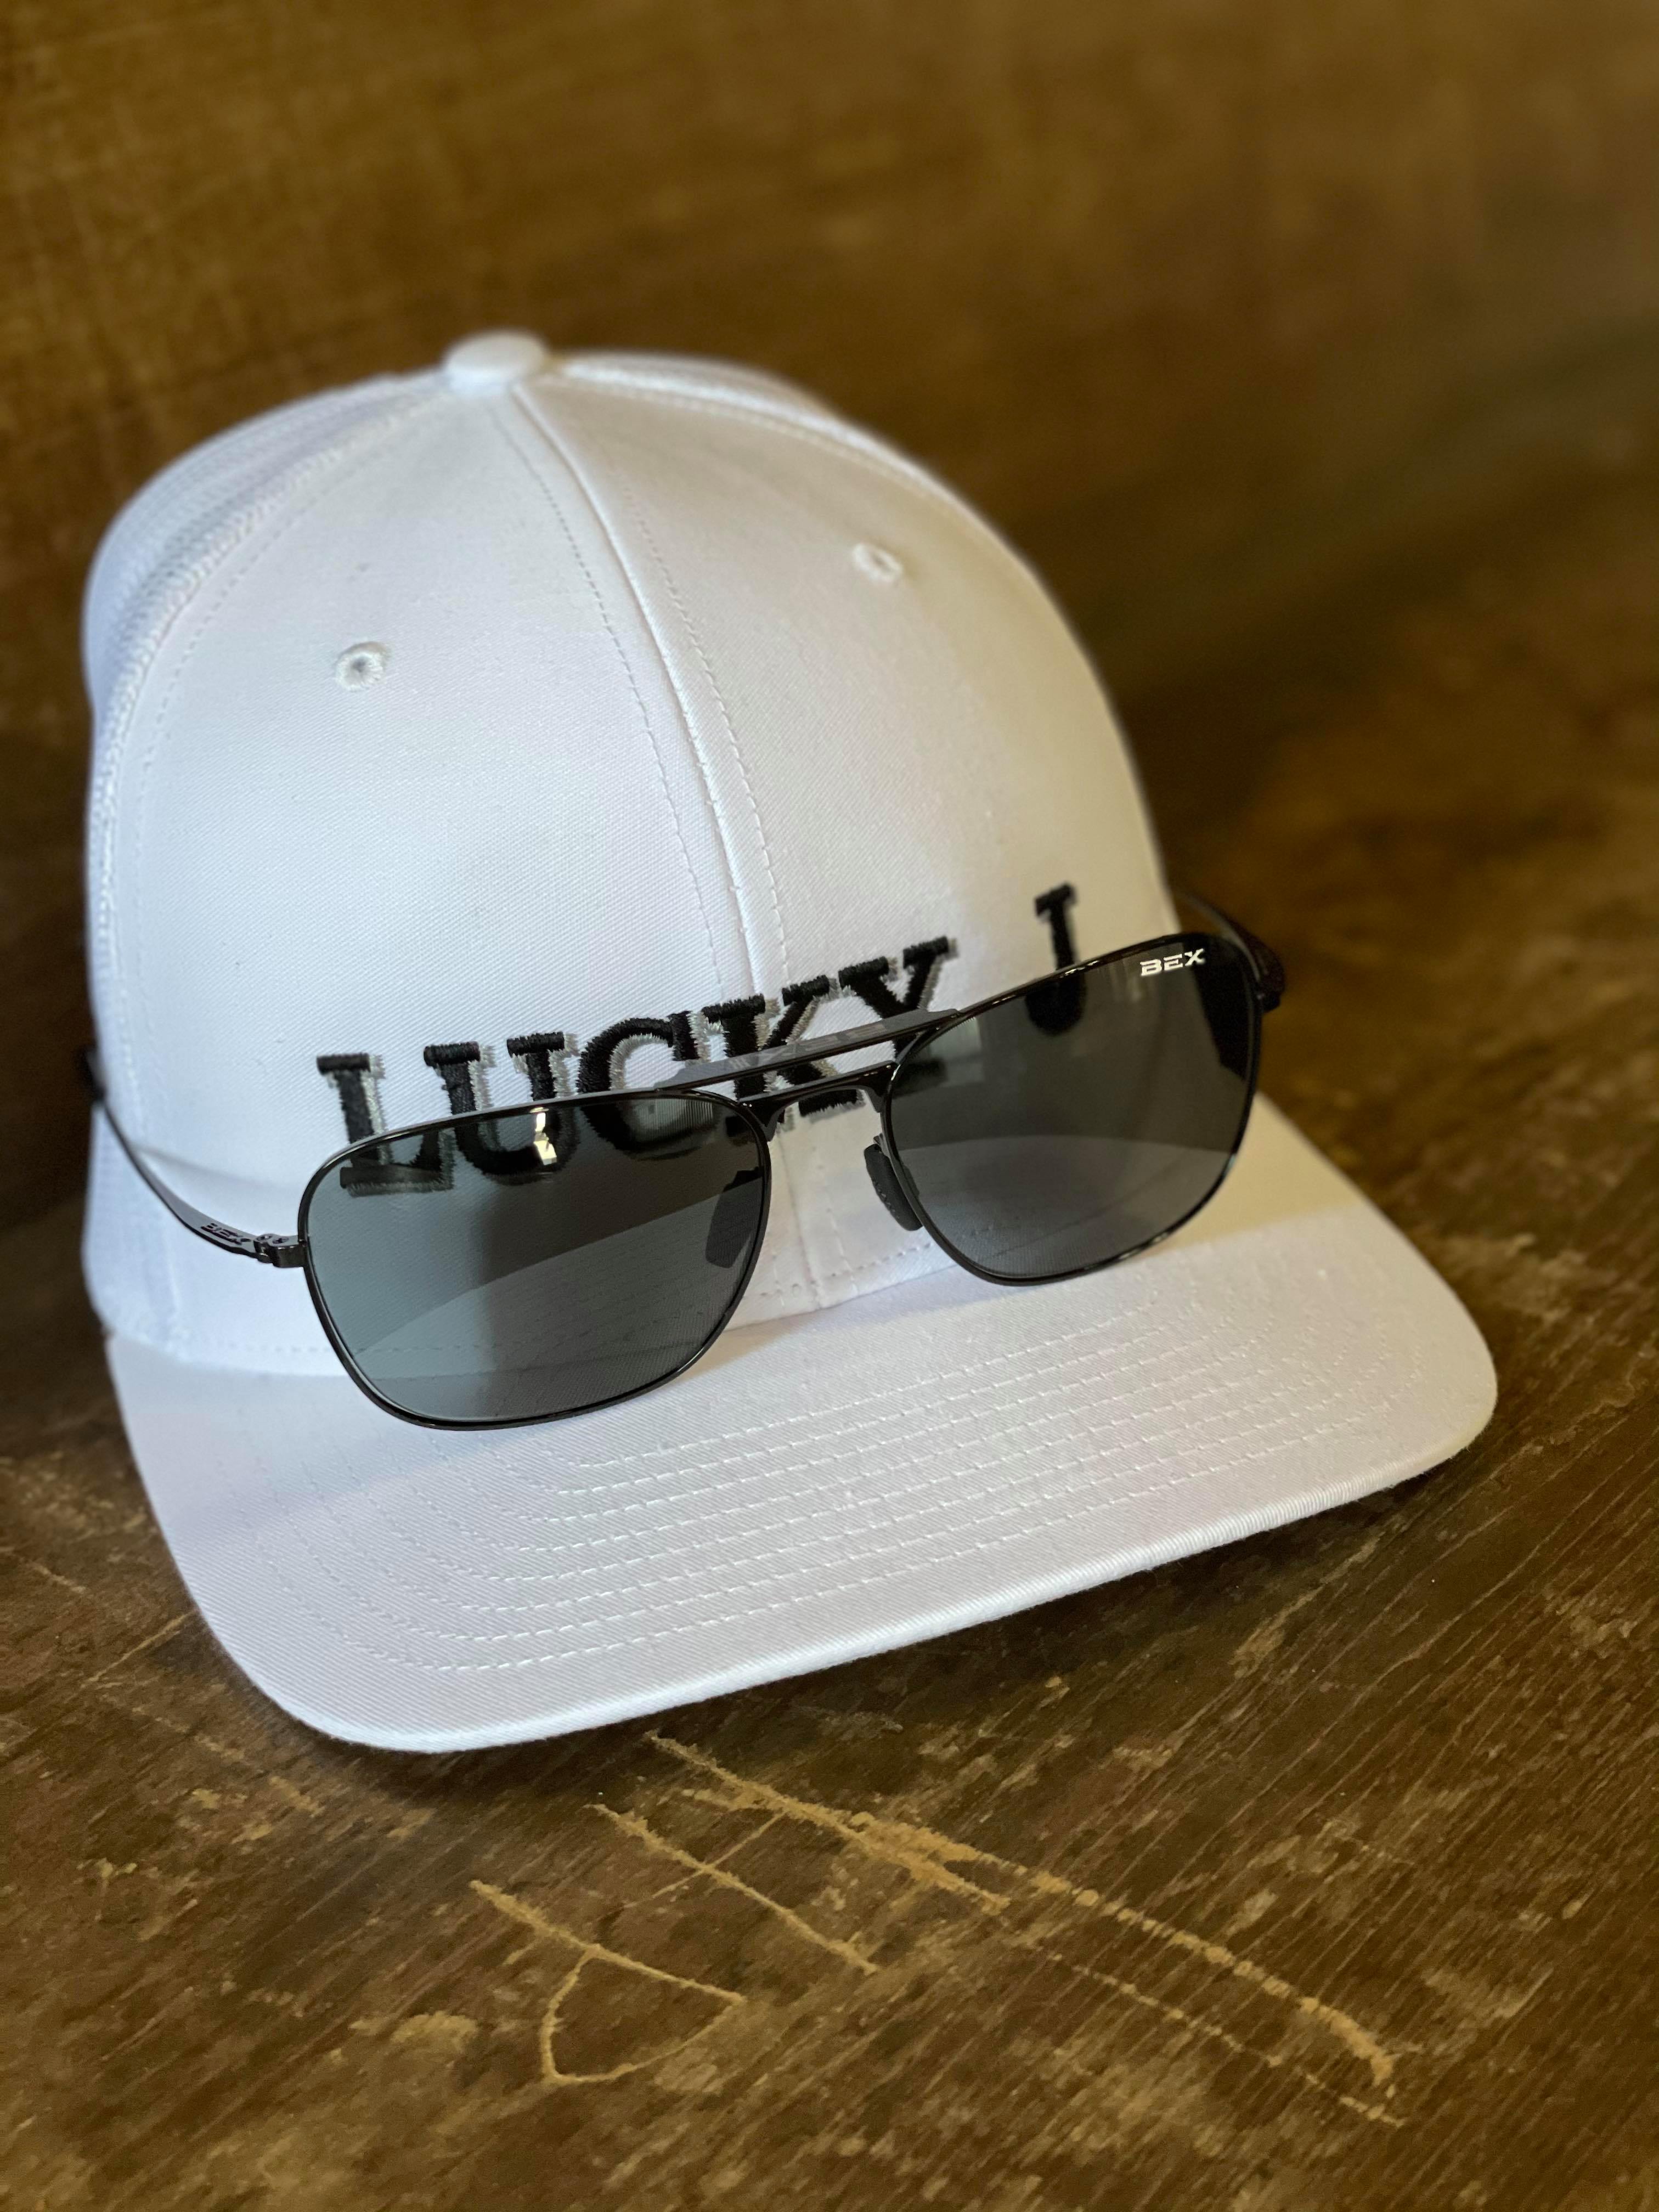 BEX Ranger Sunglasses-Sunglasses-Bex Sunglasses-Lucky J Boots & More, Women's, Men's, & Kids Western Store Located in Carthage, MO